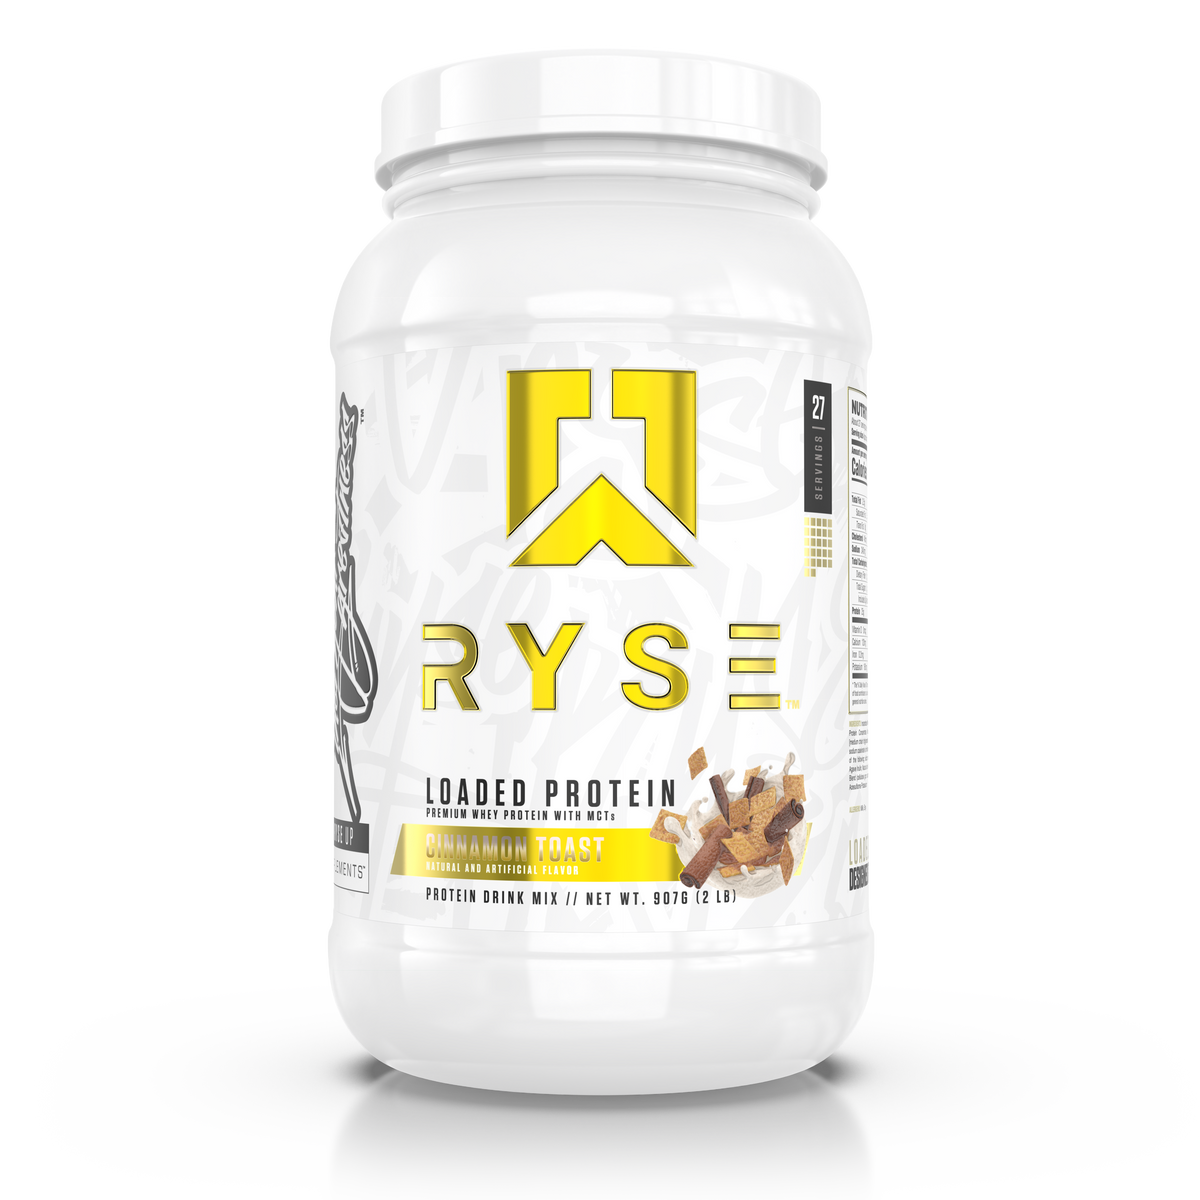 RYSE LOADED PROTEIN Peanut Butter Cup 27SVG - Athletes Nutrition